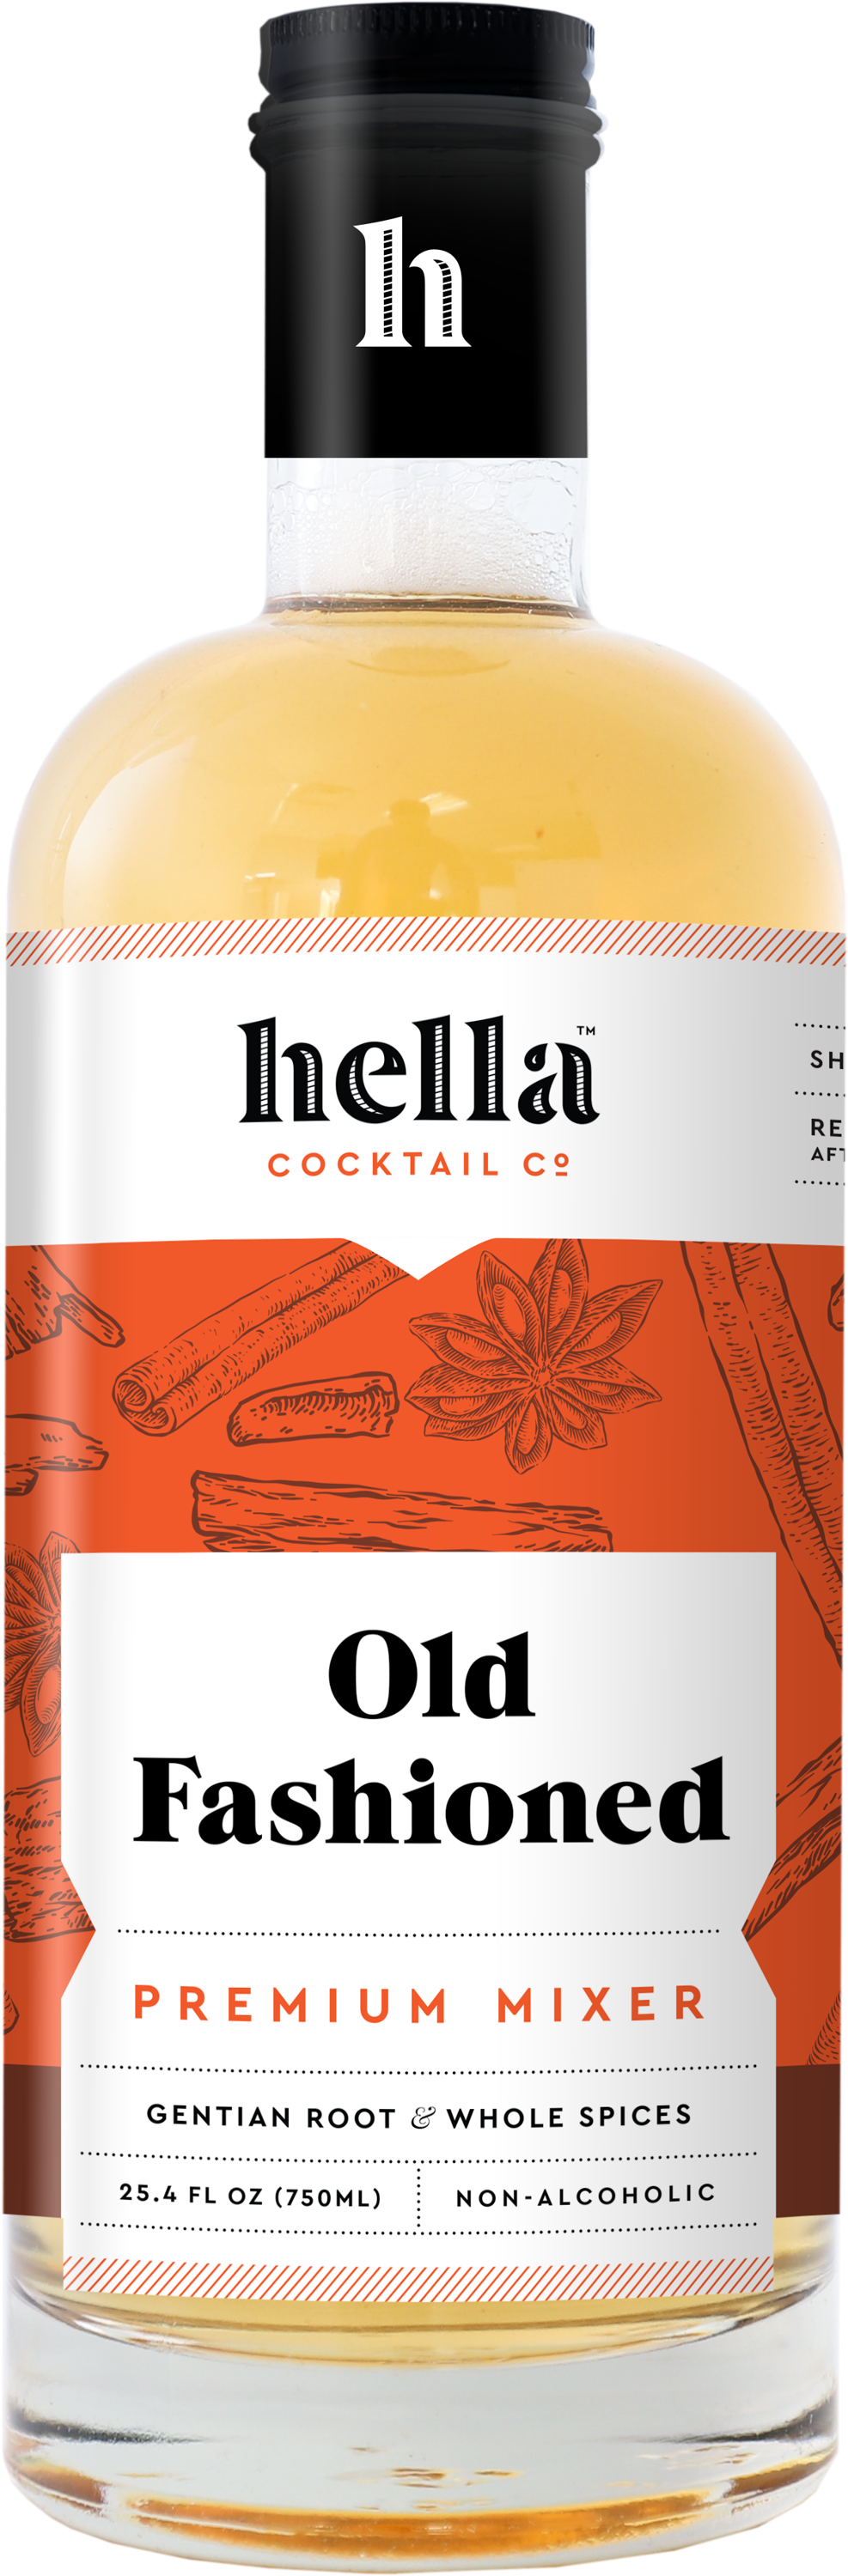 Hella Cocktail Co. Old Fashioned